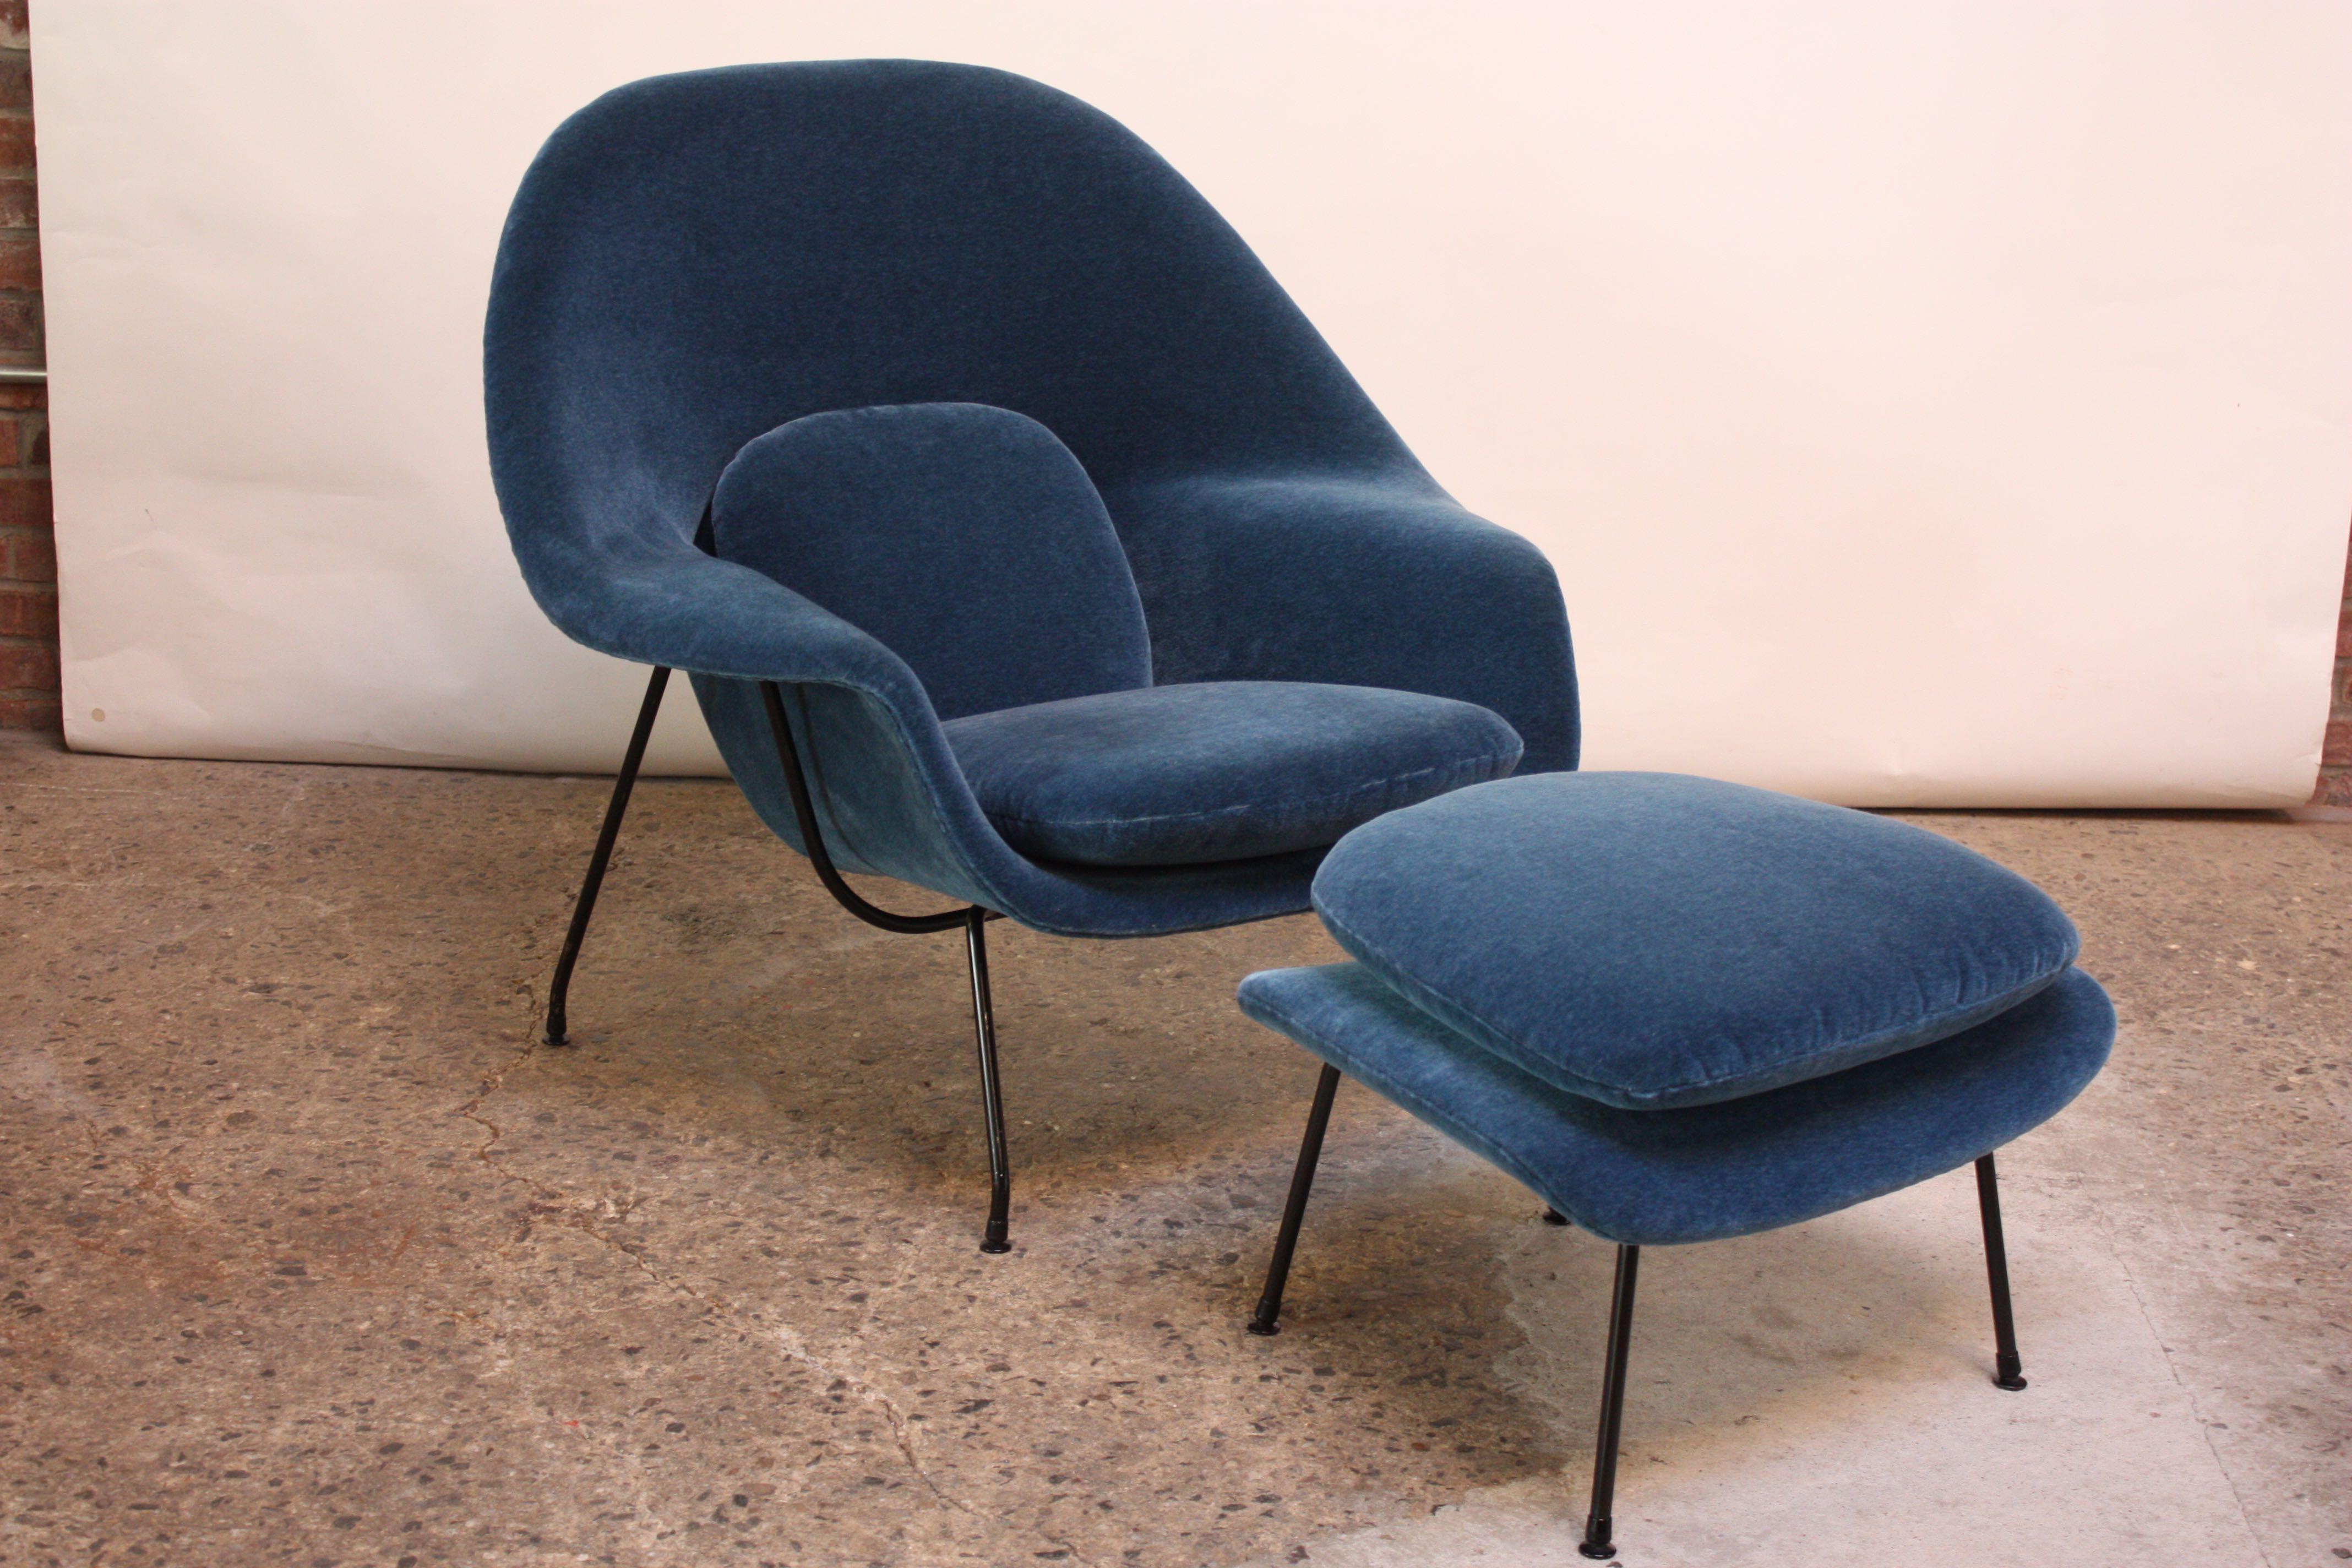 Iconic, early example, circa 1950-1951 'Womb' chair by Saarinen for Knoll. Newly recovered in blue mohair. Bent-wrought iron frame retains its original black paint and press-on glides (indicative of an early production). There is paint loss to the